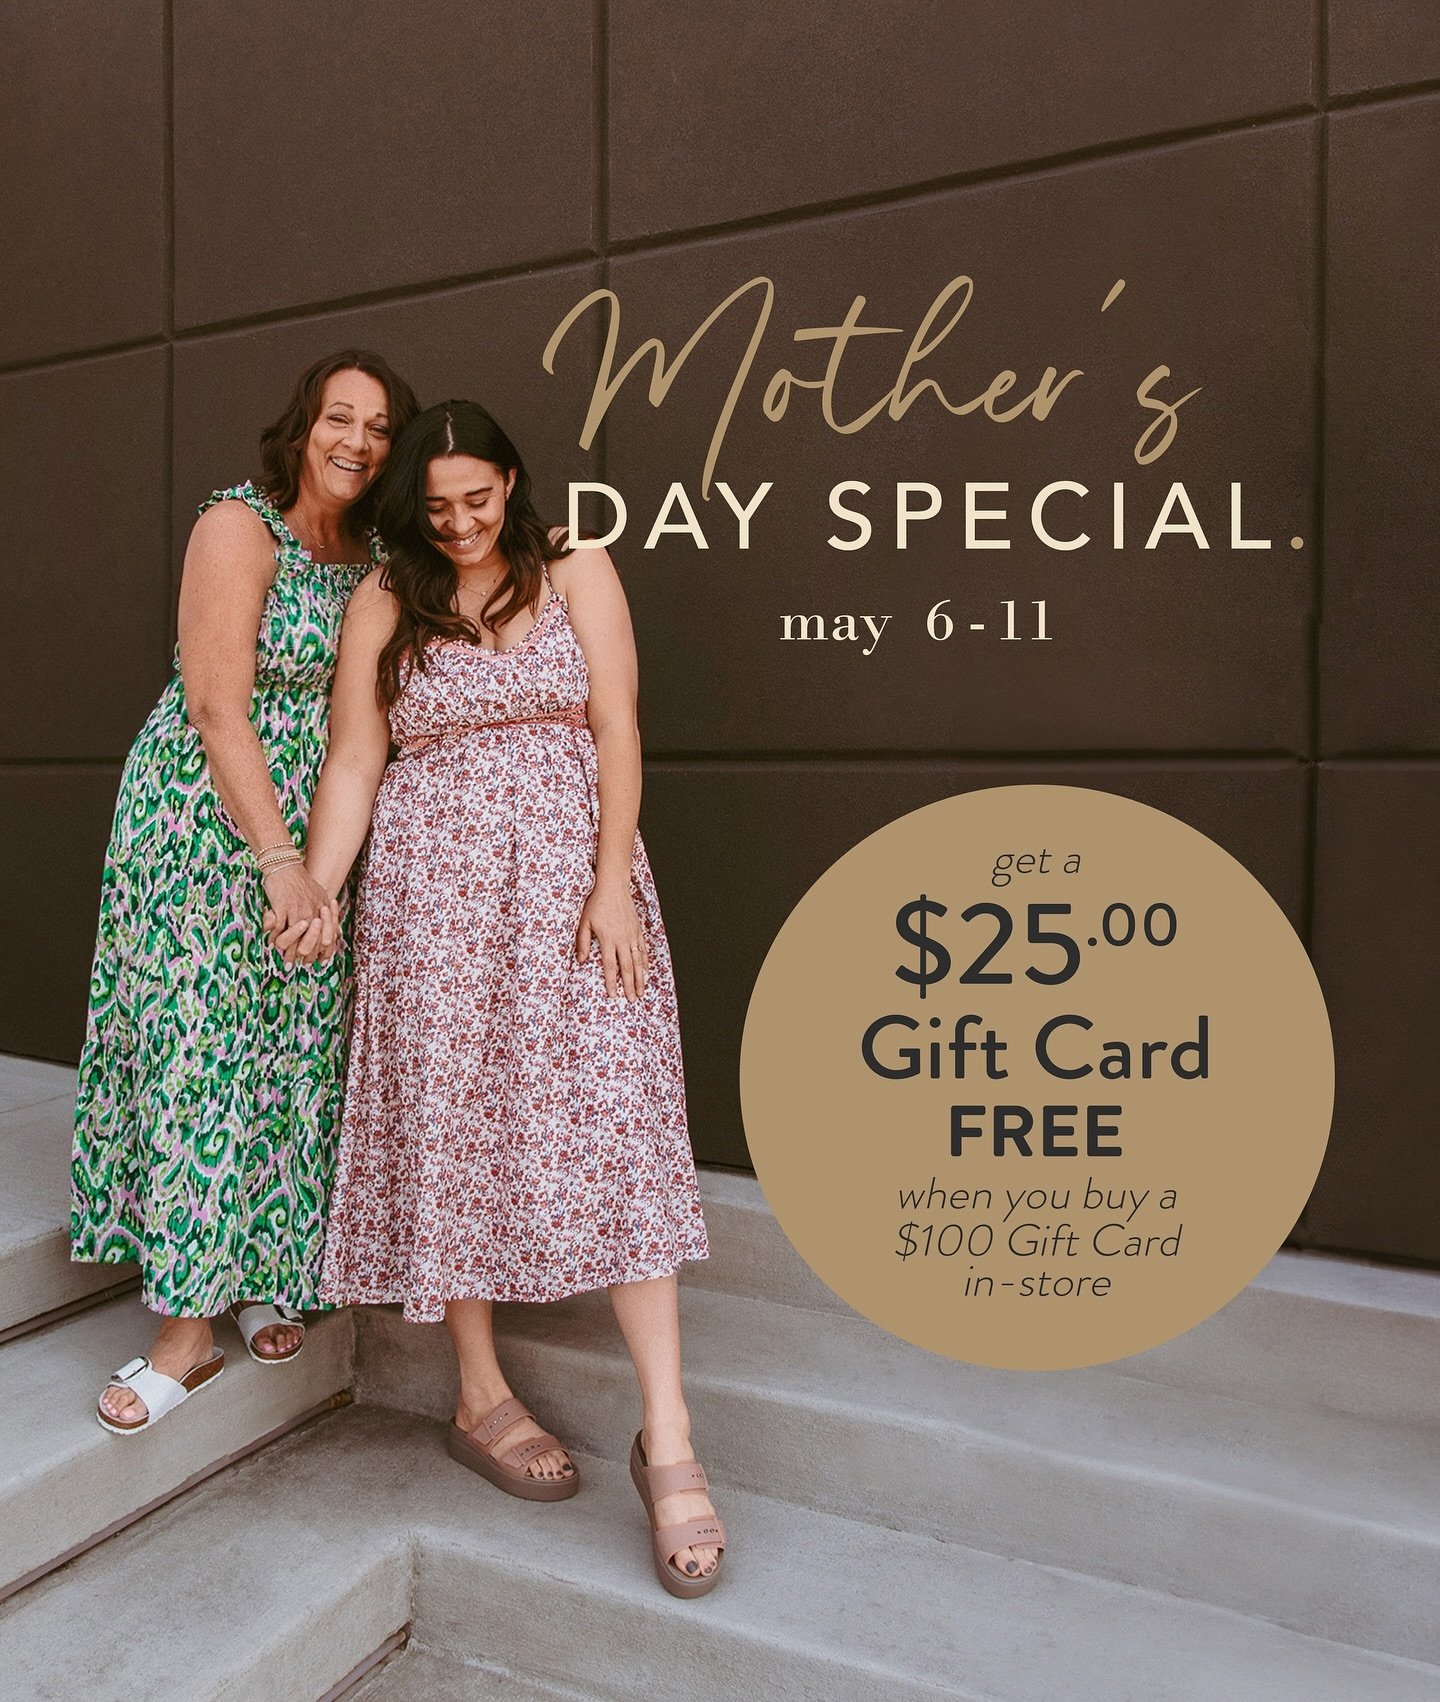 💐 Mother&rsquo;s Day Gift Card Special 💐 
at bfearless. 
[ May 6 - 11 ]

✨ get a $25 gift card FREE when you buy a $100 gift card in-store during the above dates! ✨

**Gift cards must be used after Mother&rsquo;s Day. Cannot be combined with other 